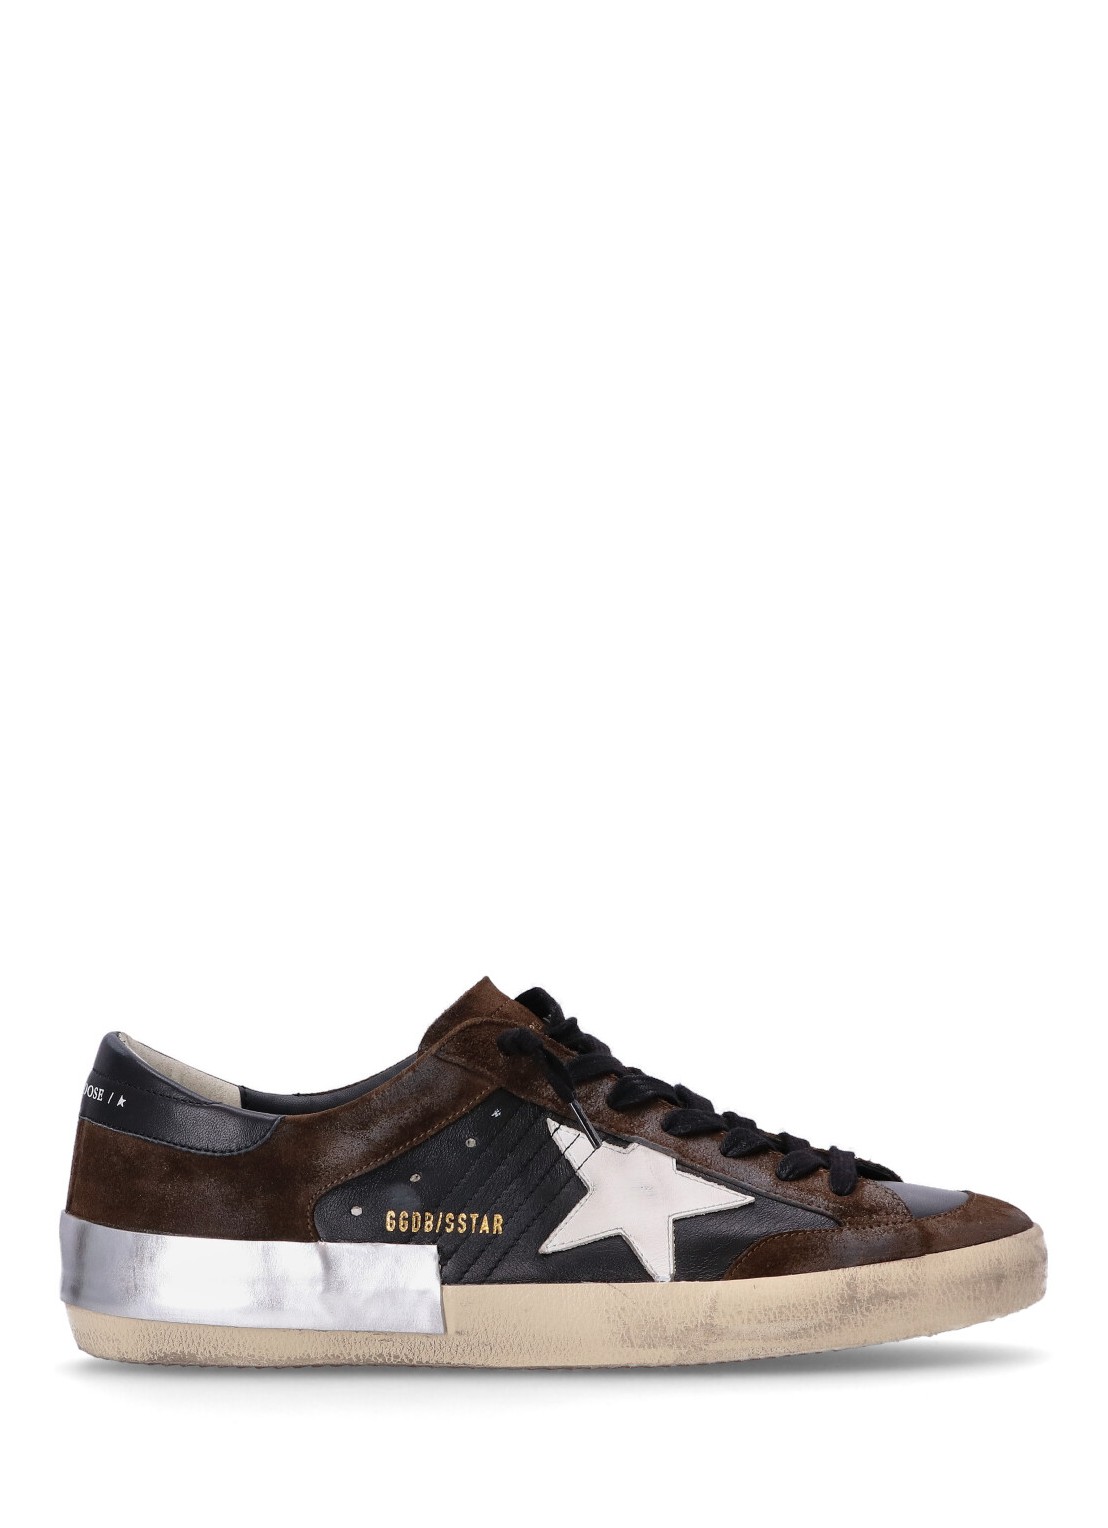 Sneaker golden goose sneaker man super-star nappa and suede upper leather star nappa heel gmf00659f0